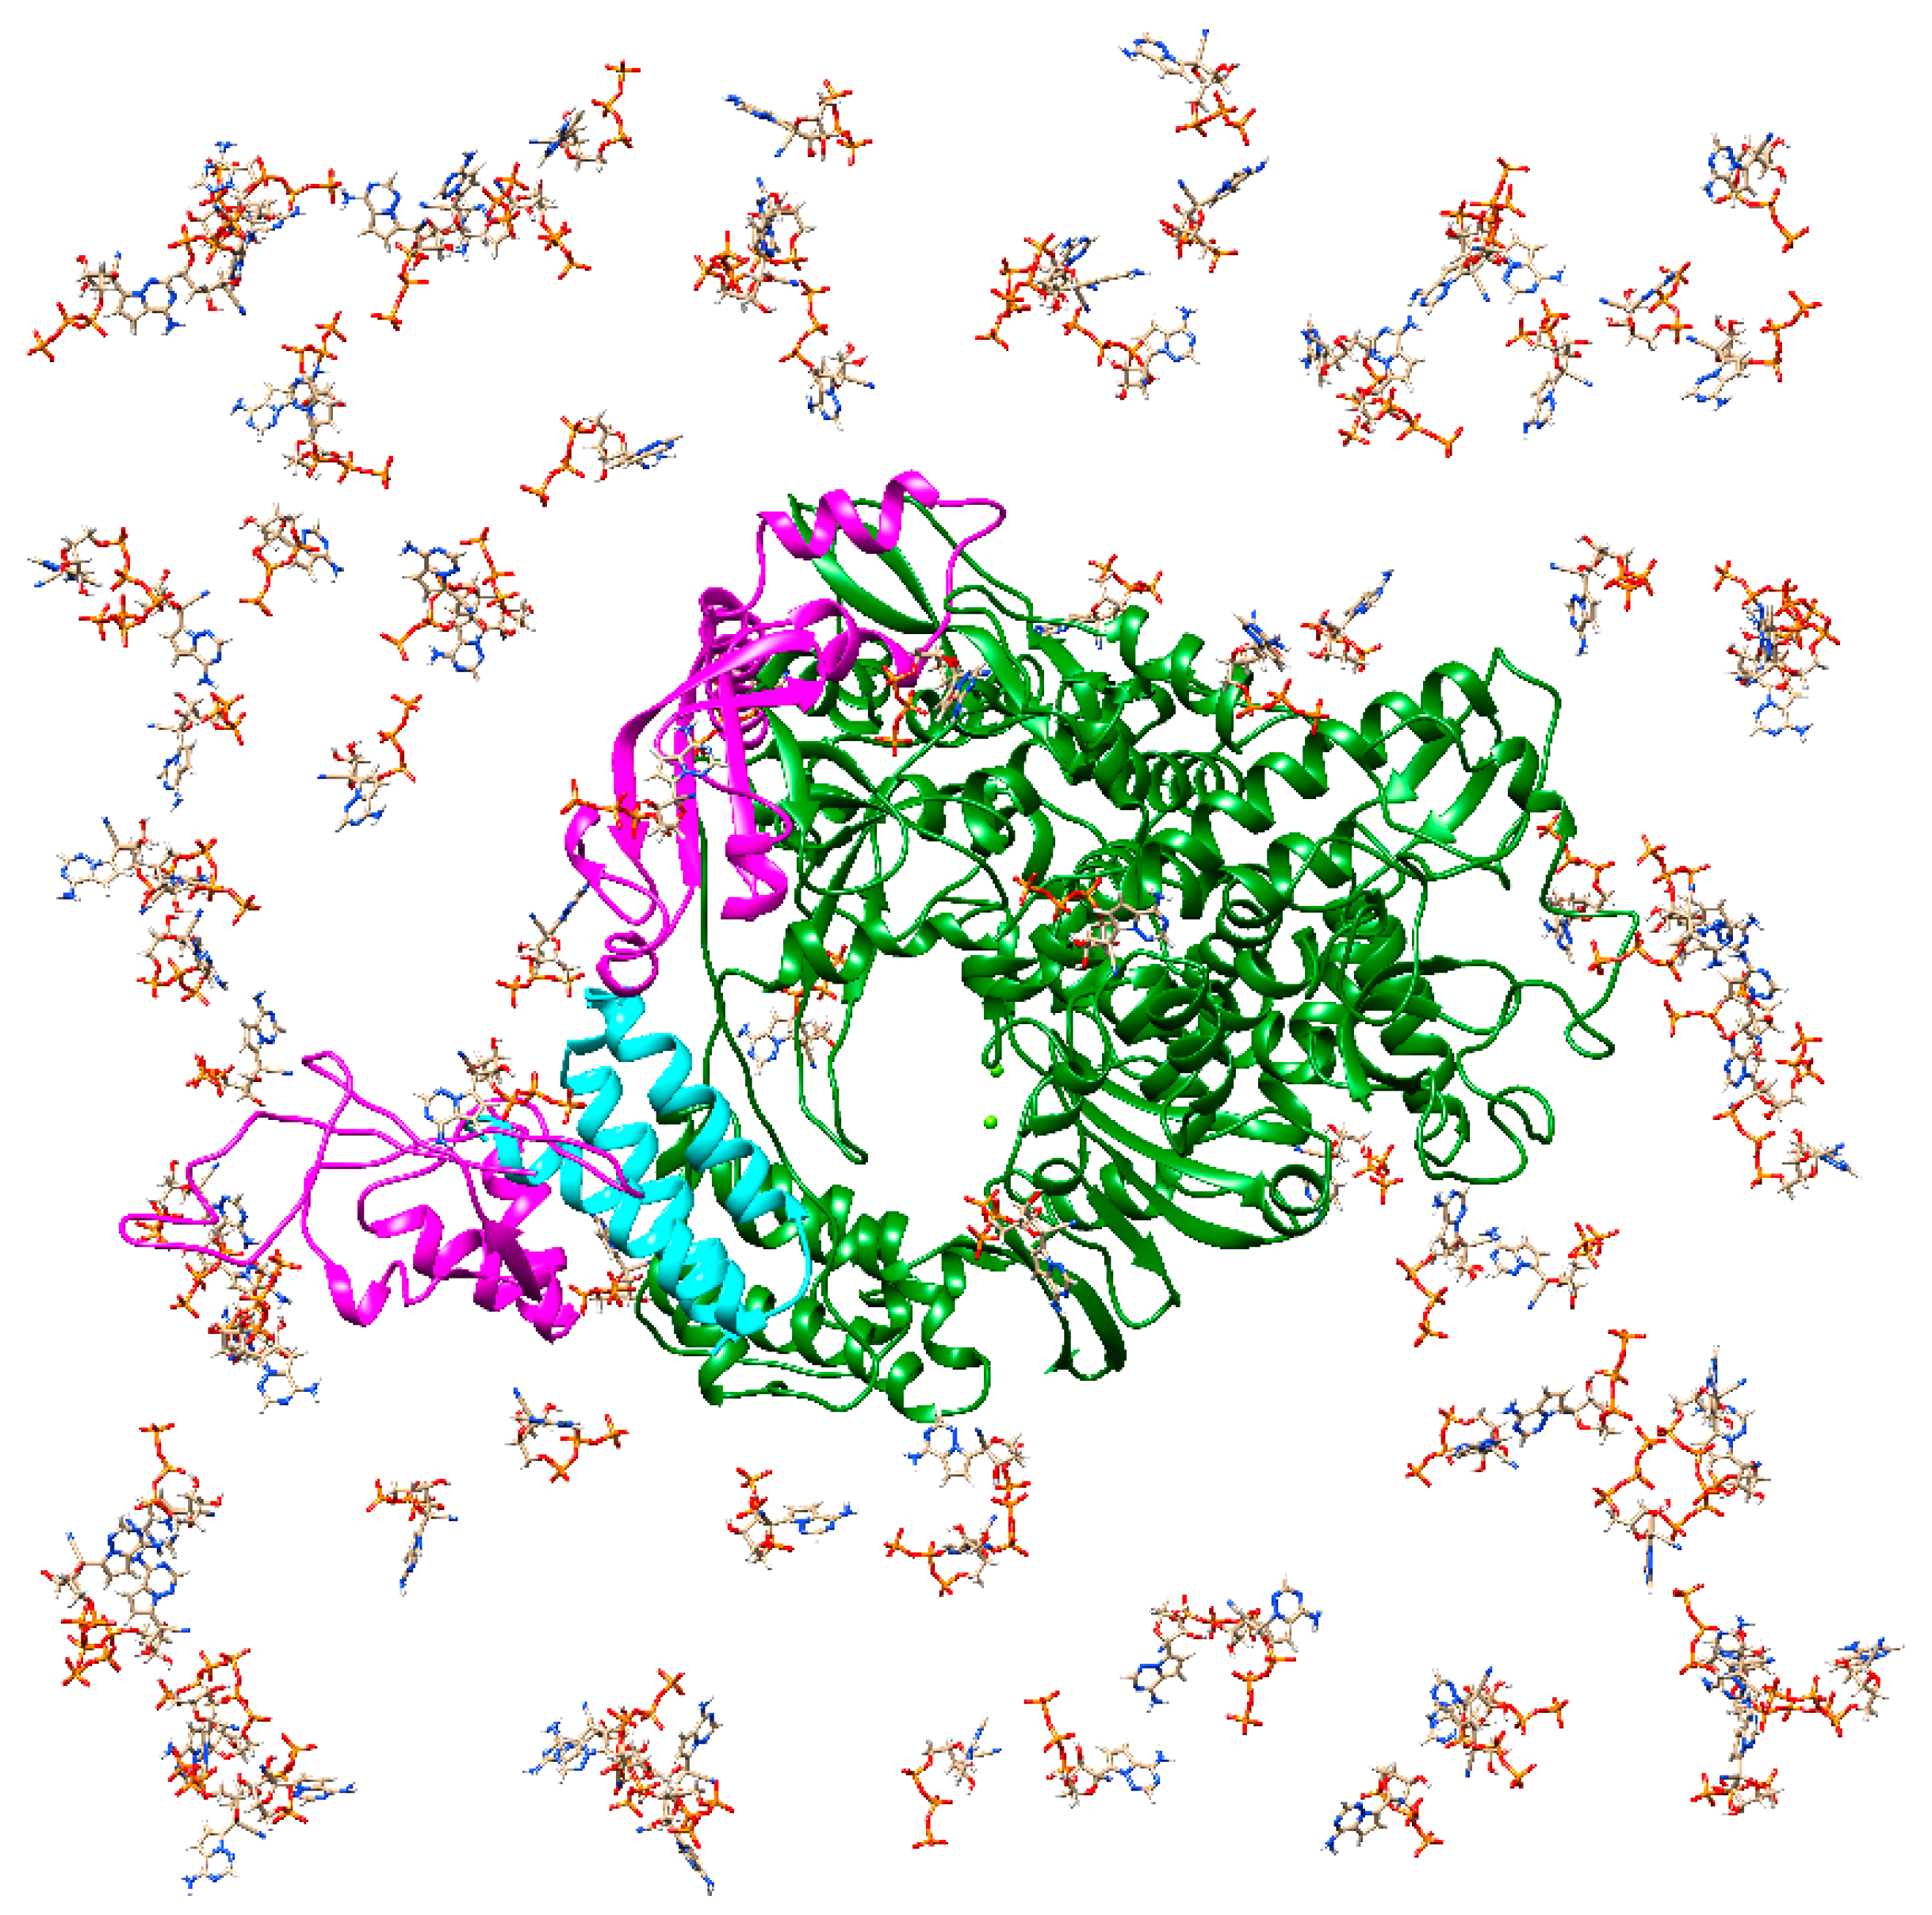 IJMS | Free Full-Text | State-of-the-Art Molecular Dynamics 